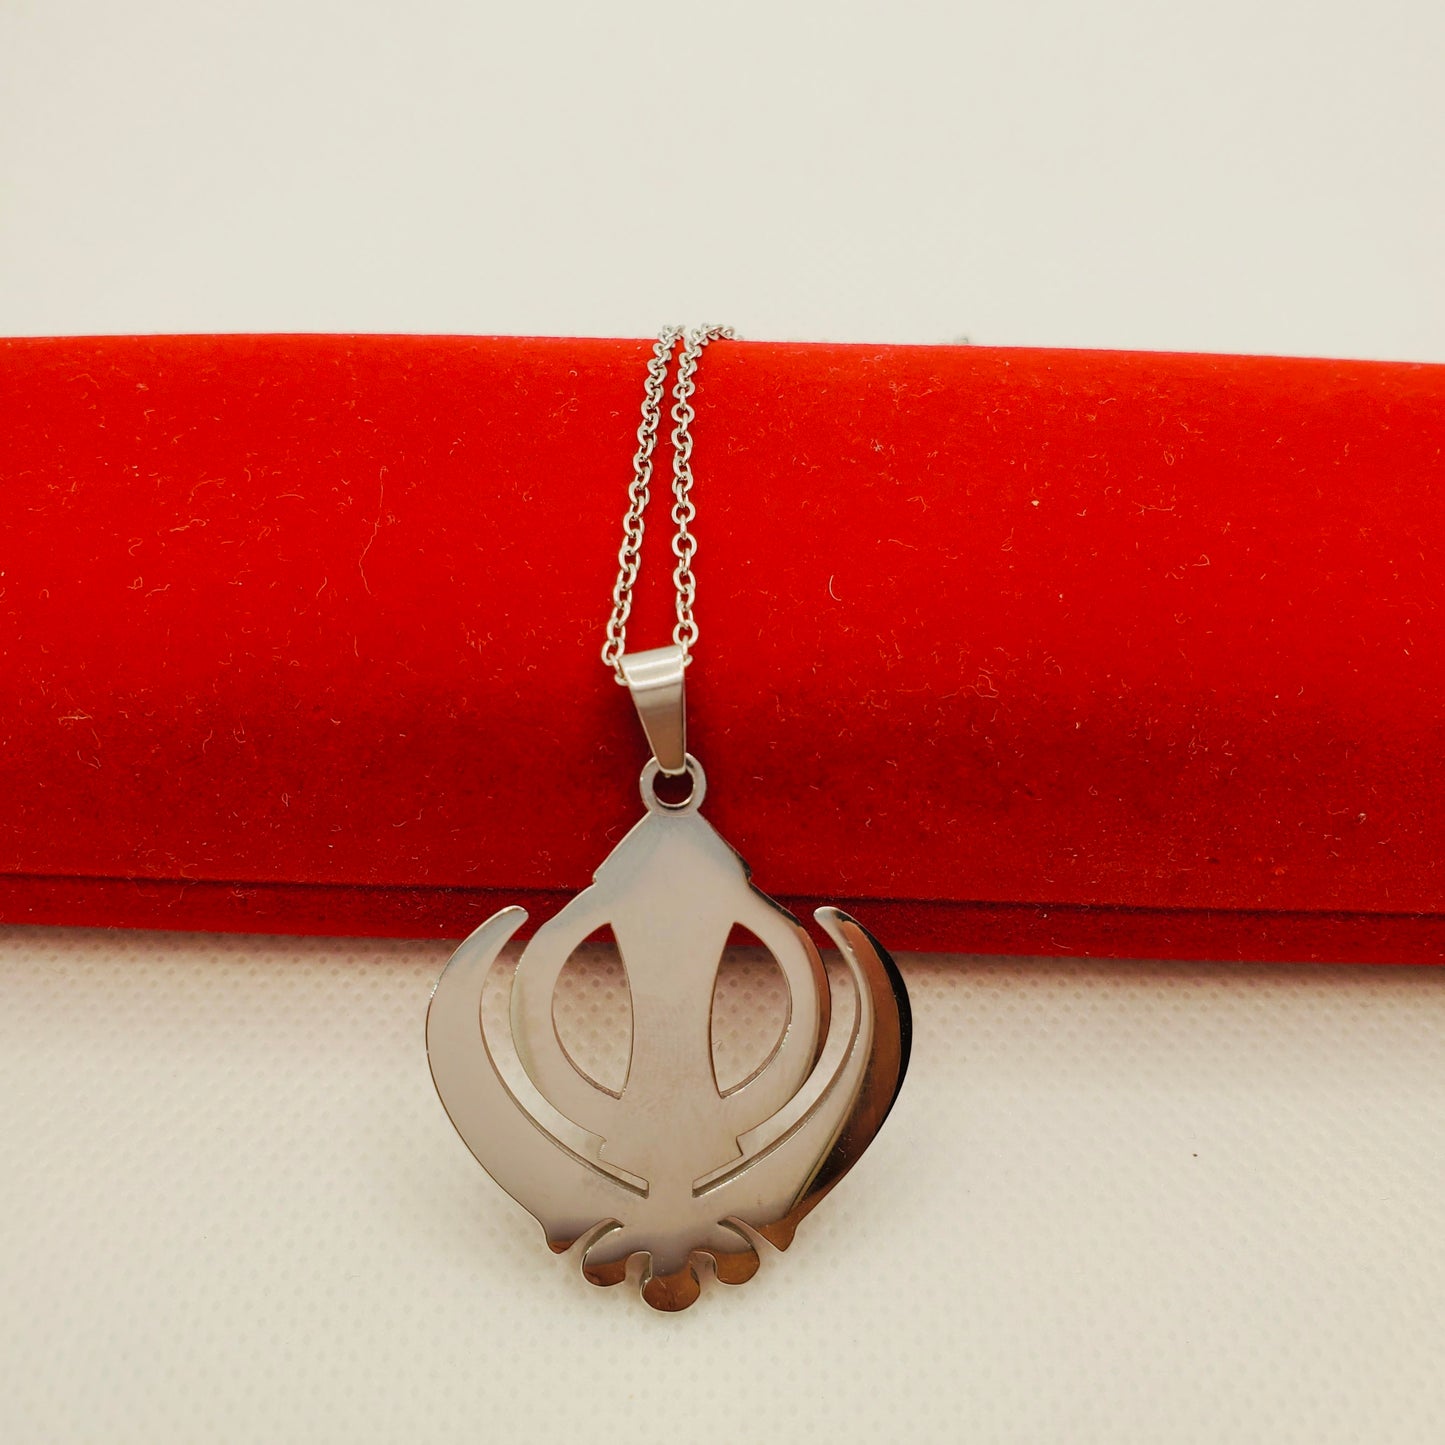 Khanda Silver; Necklace made to touch your soul | The best Religious Necklaces on earth